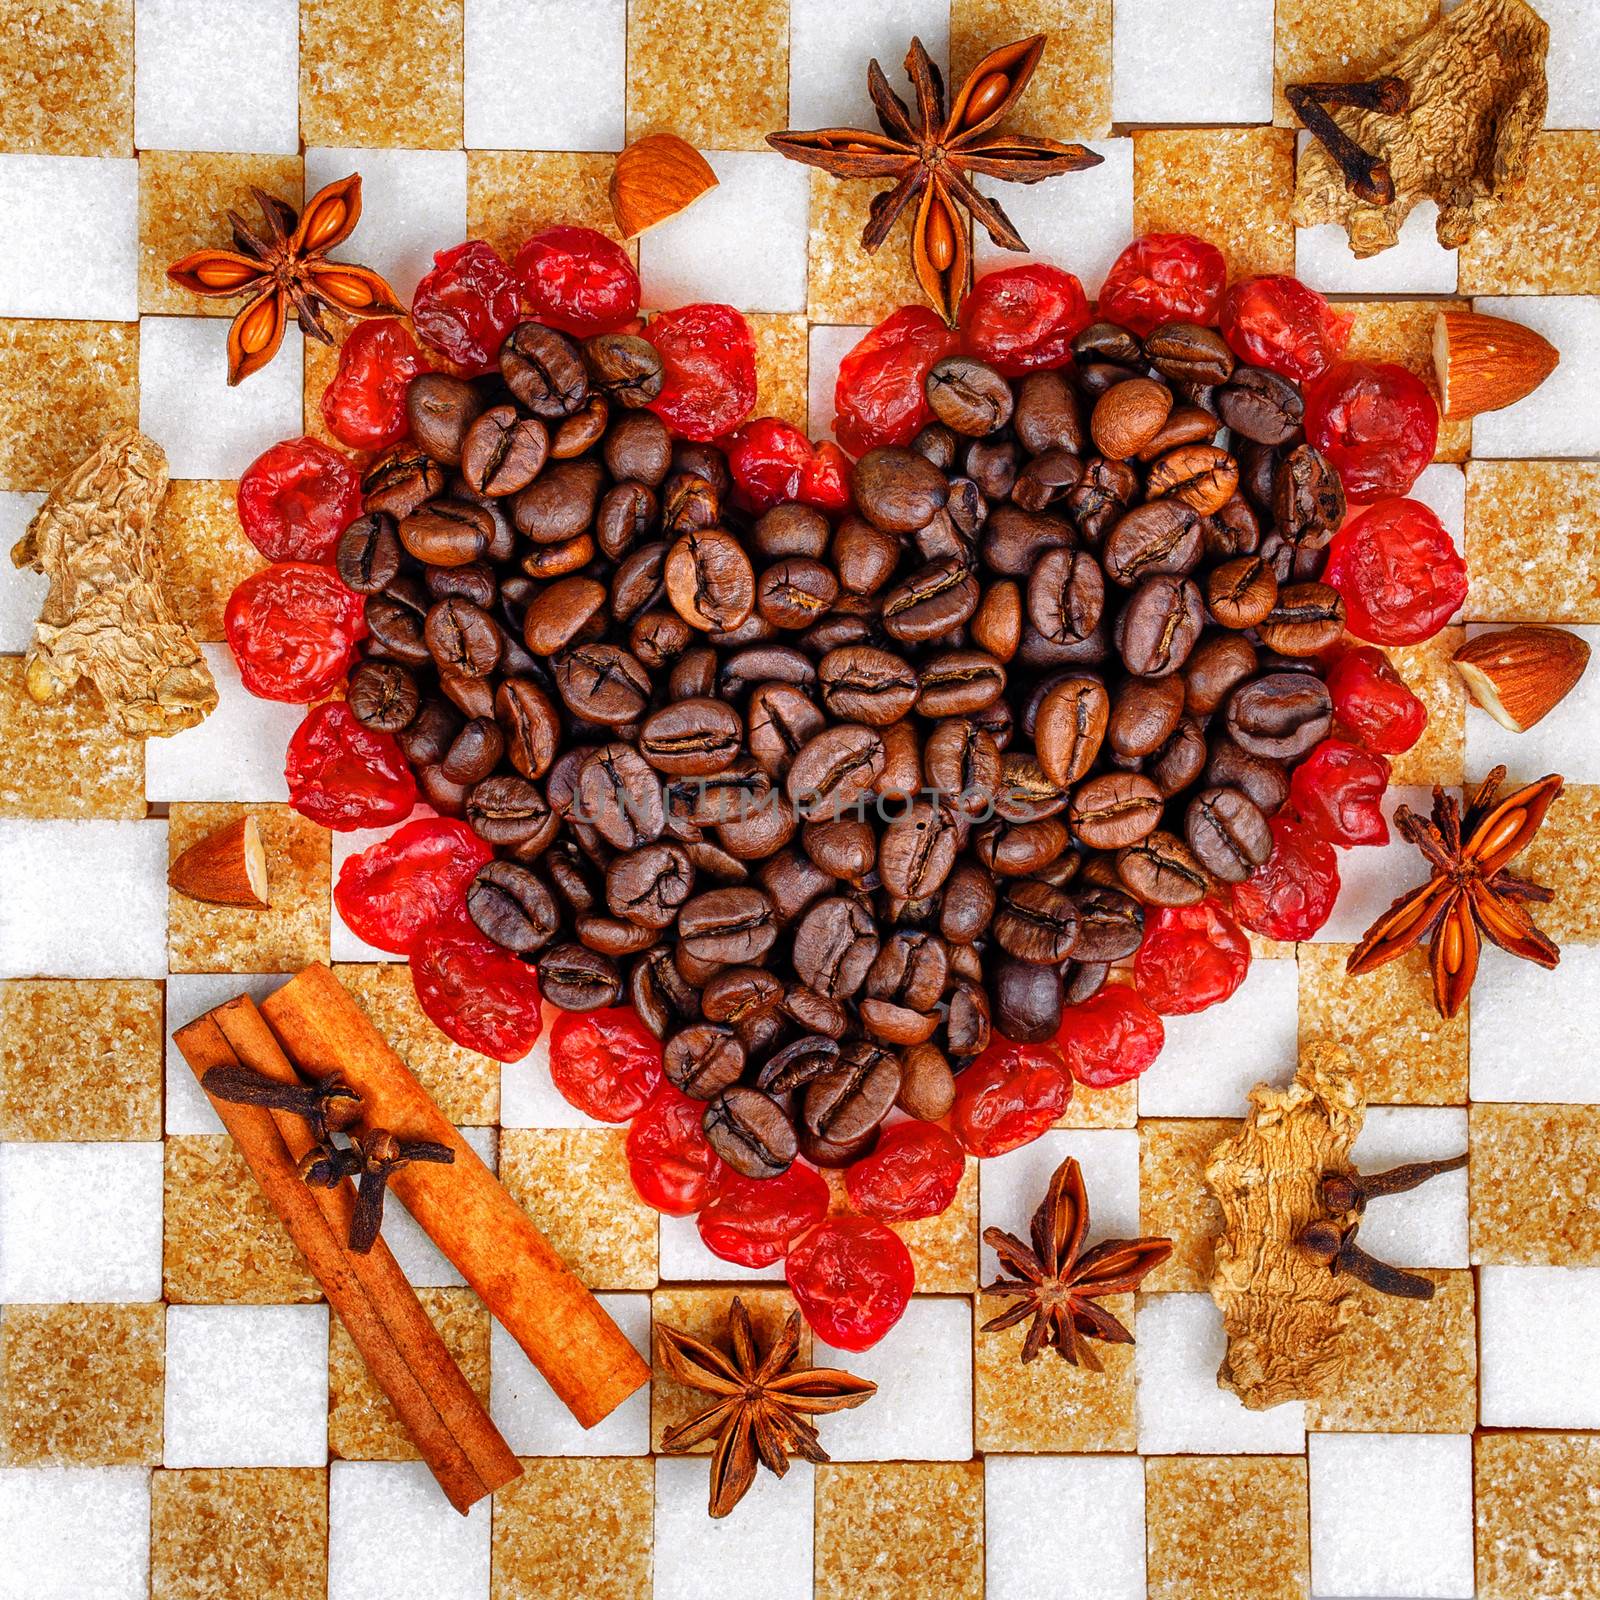 Heart of the coffee and cherries laid out on chessboard made of sugar cubes